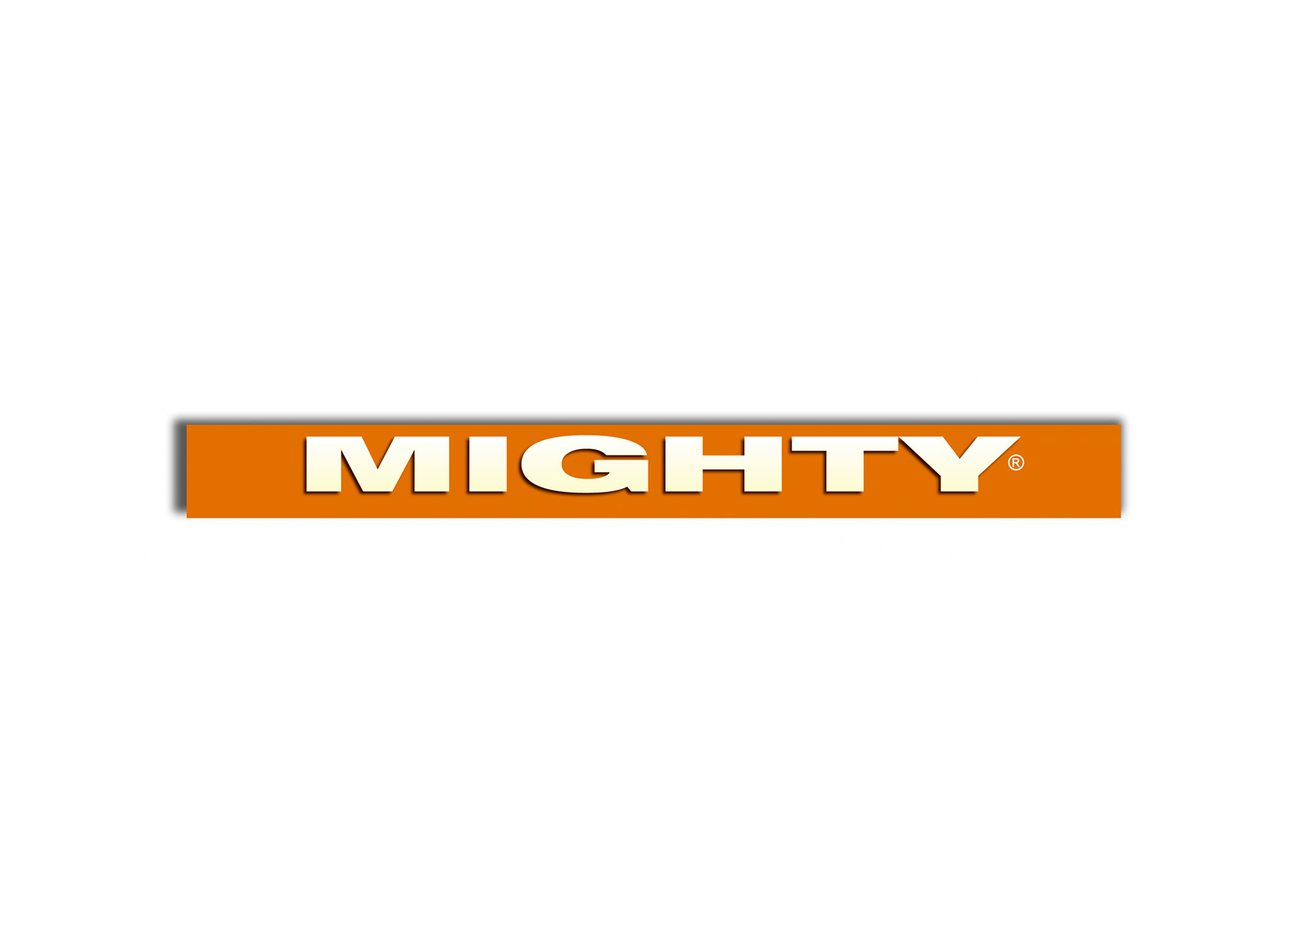 MIGHTY